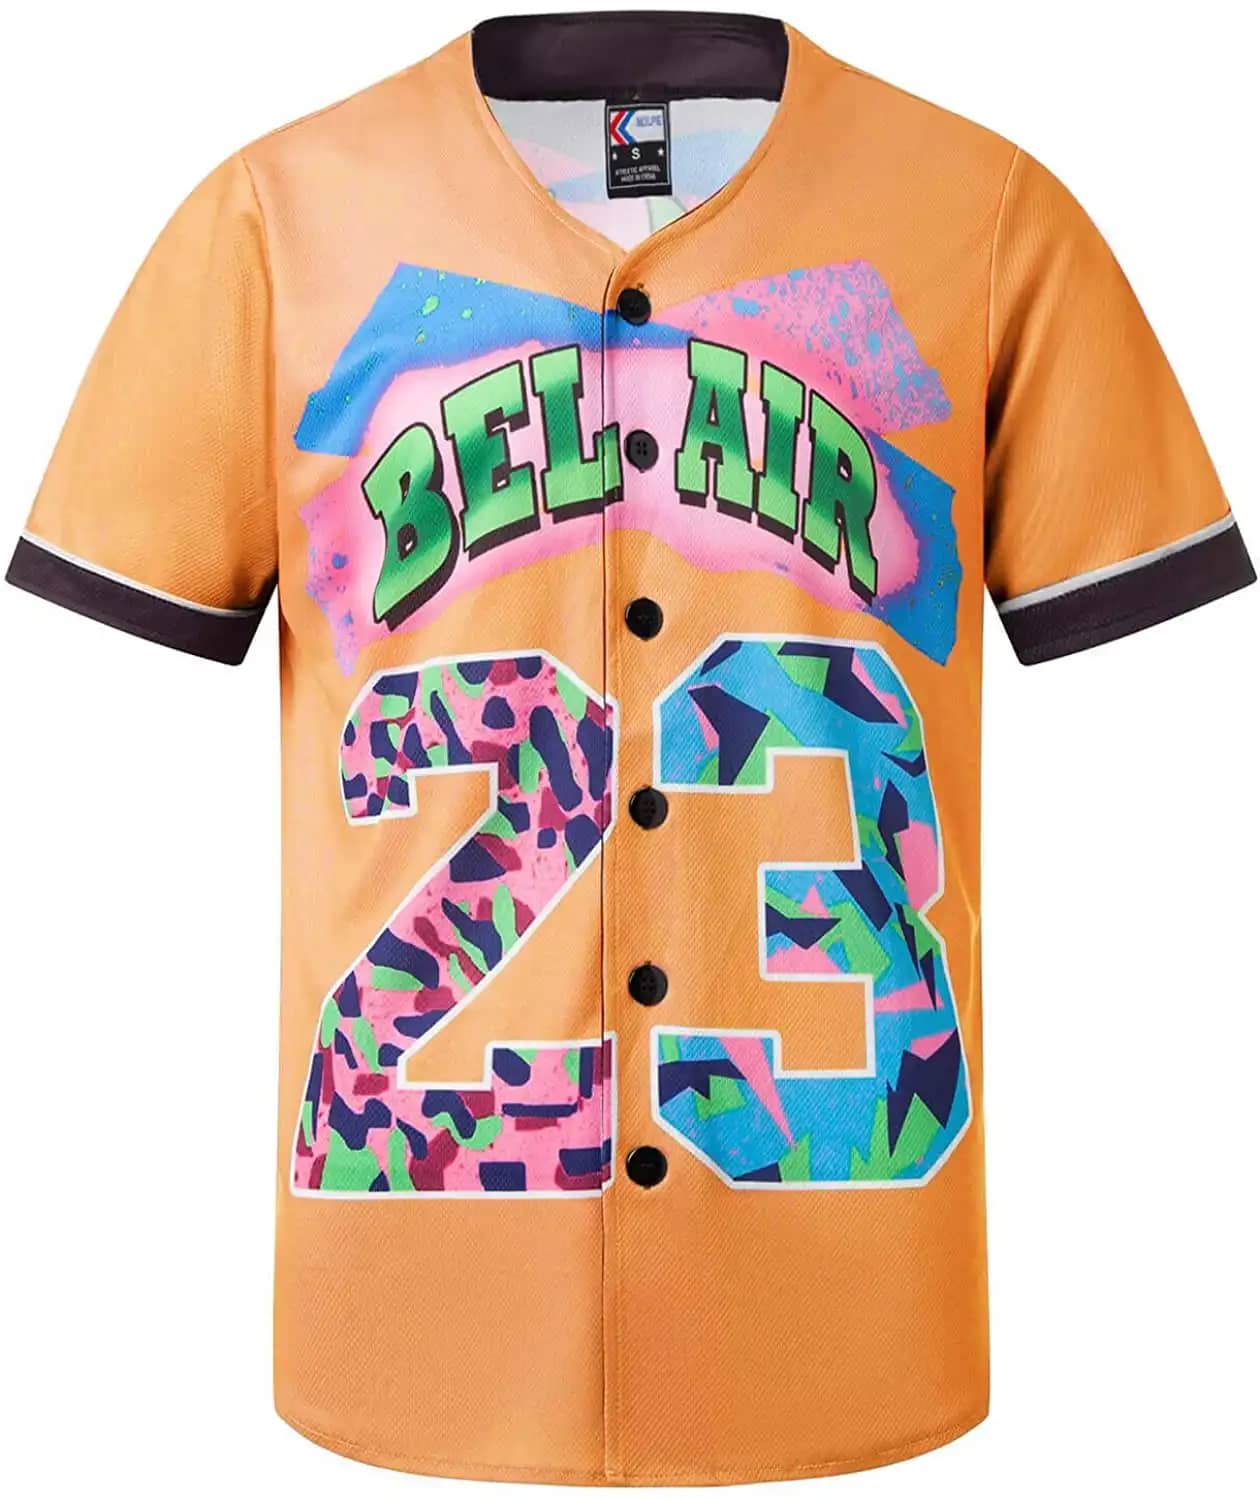 Personalized Orange Shirts Hip Hop 90S Fashion Custom Number Idea Gift For Fans Baseball Jersey